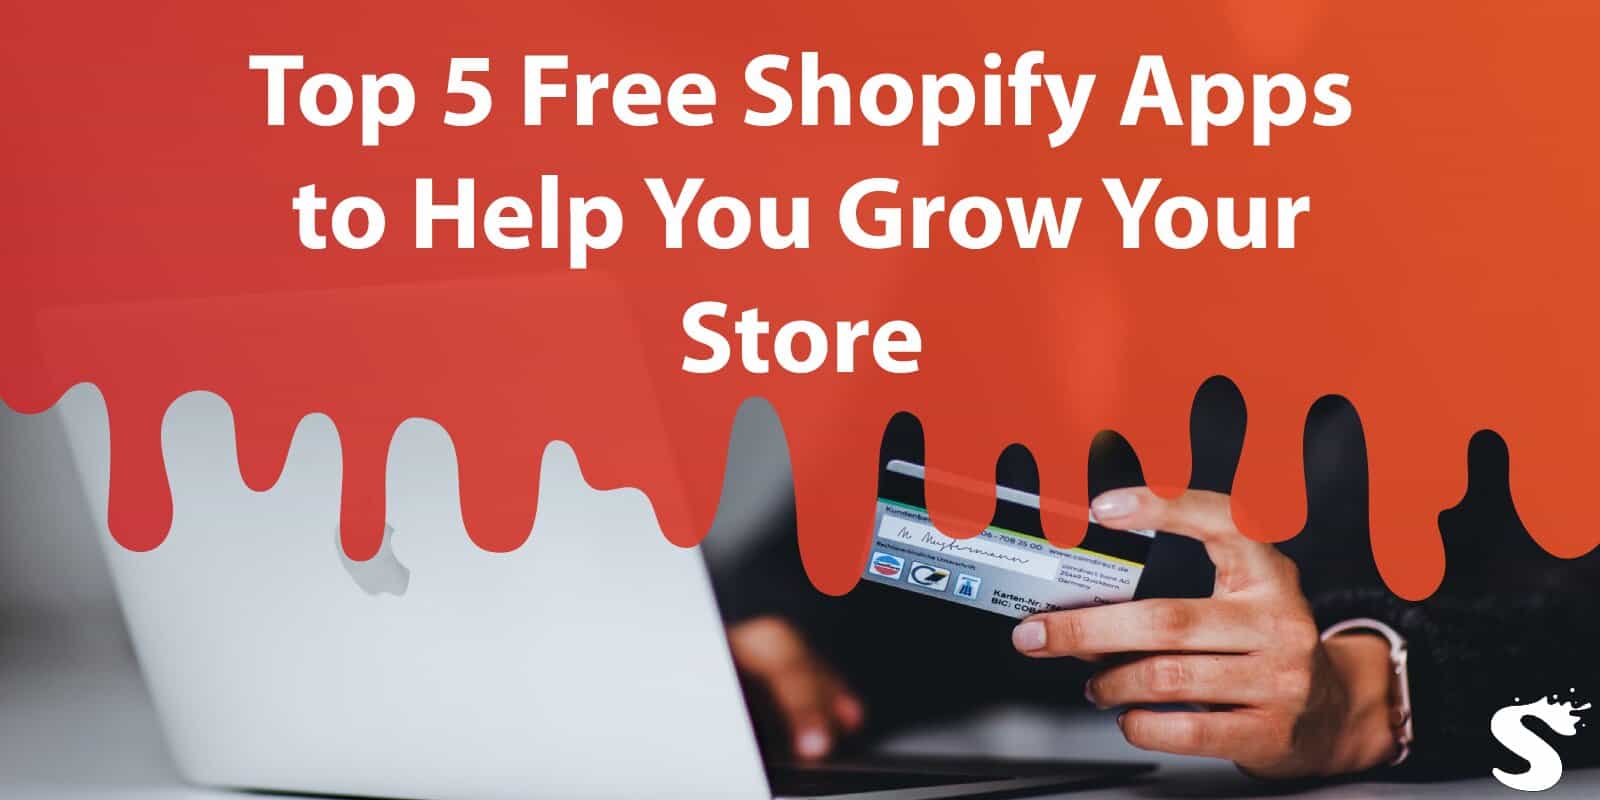 Top 5 Free Shopify Apps to Help You Grow Your